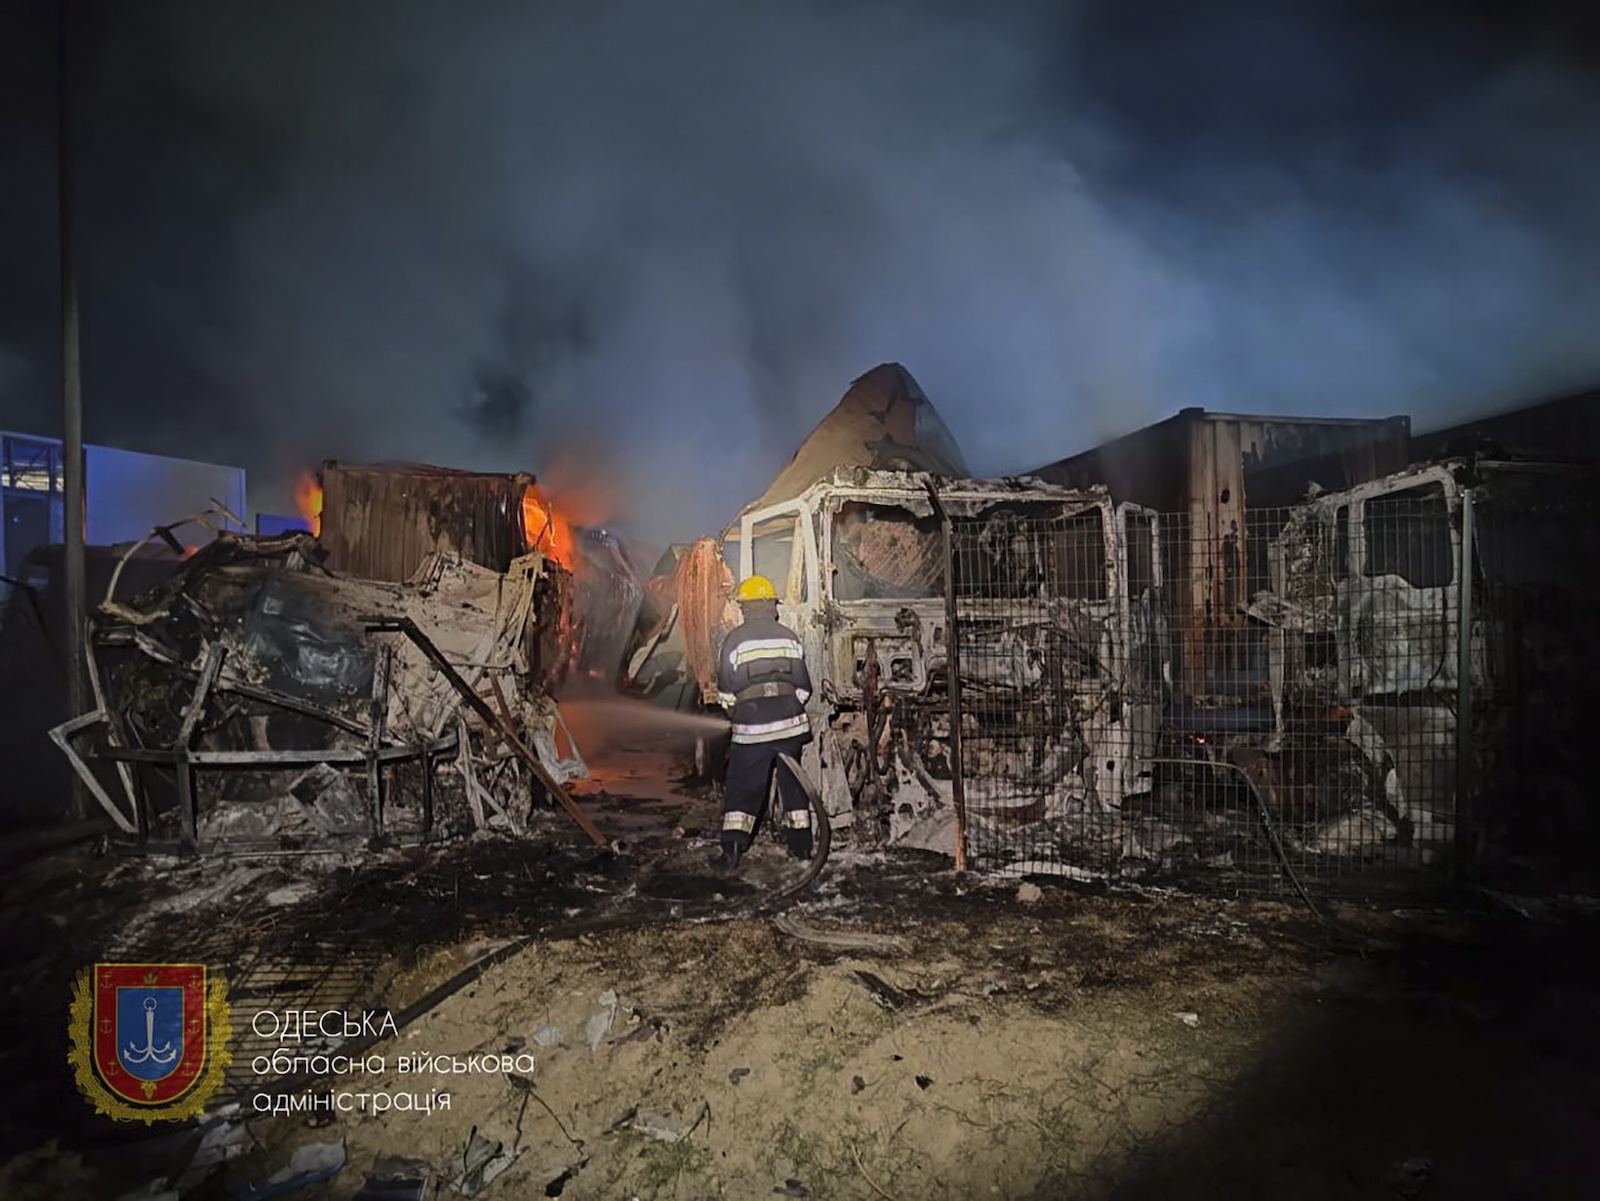 epa10883296 A handout photo made available by the Odesa Regional State Administration shows rescuers working to put down a fire after an overnight attack of a seaport infrastructure object in the Odesa region, southern Ukraine, 26 September 2023. At least two people were injured in the attack according to Oleg Kiper, the Head of Odesa Regional State Administration. Russian troops entered Ukrainian territory in February 2022, starting a conflict that has provoked destruction and a humanitarian crisis.  EPA/ODESA REGIONAL STATE ADMINISTRATION / HANDOUT HANDOUT  HANDOUT EDITORIAL USE ONLY/NO SALES